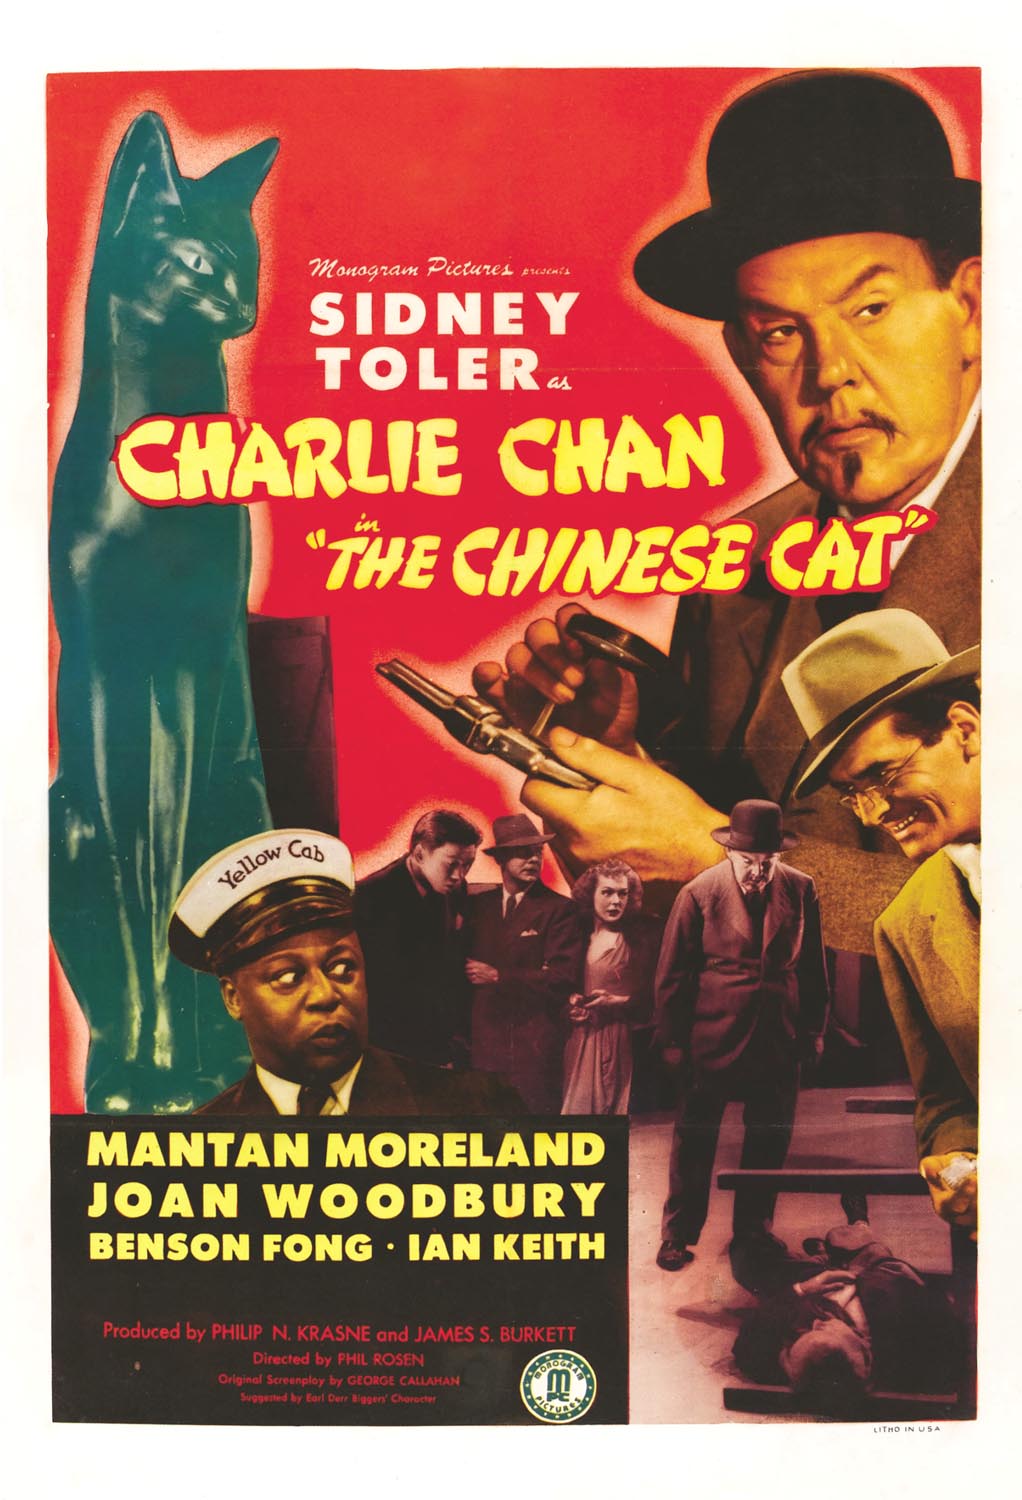 CHARLIE CHAN IN THE CHINESE CAT